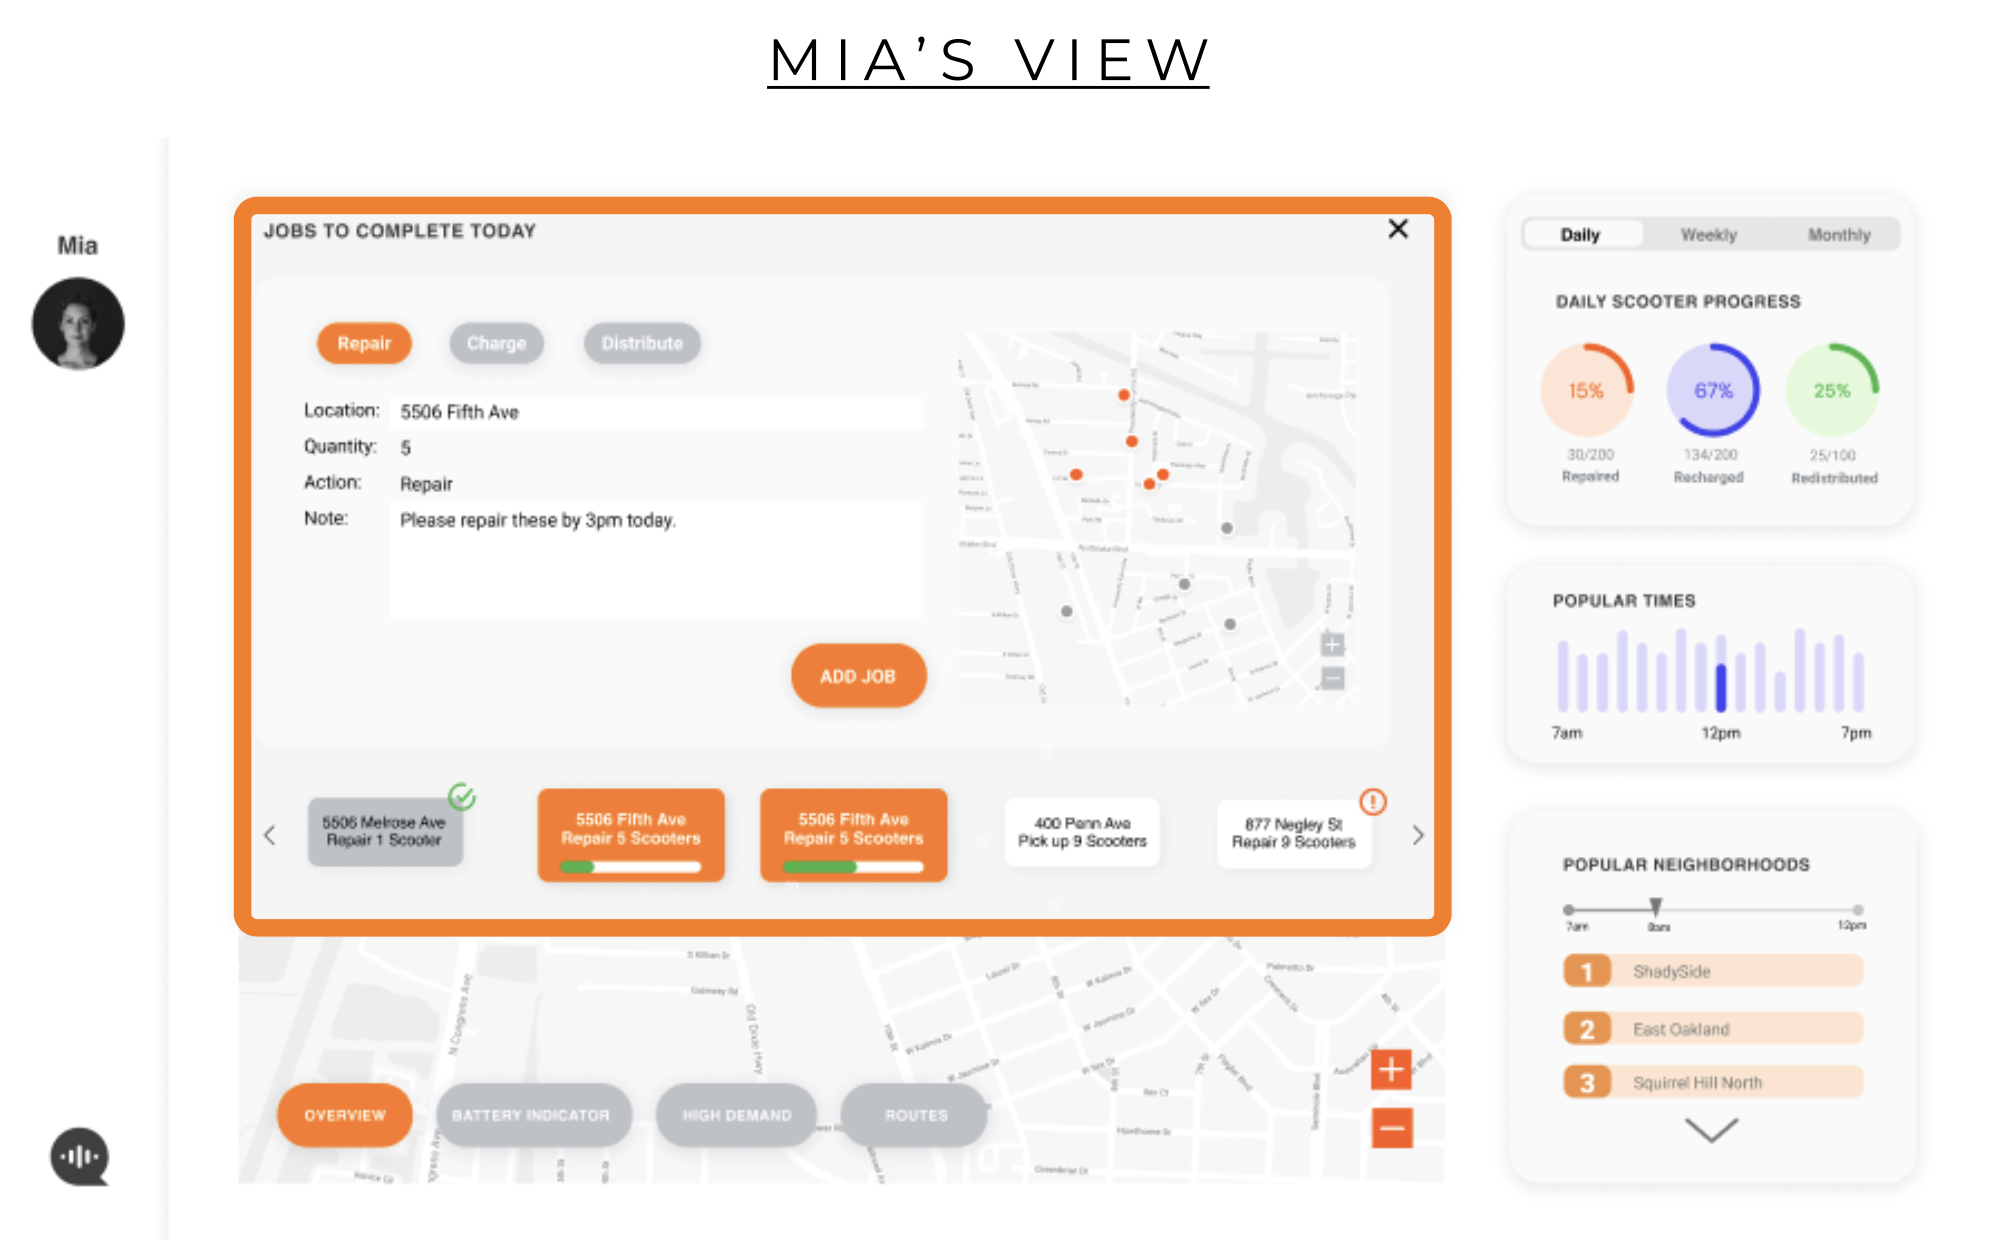 Task Manager view for Mia the Data Analyist